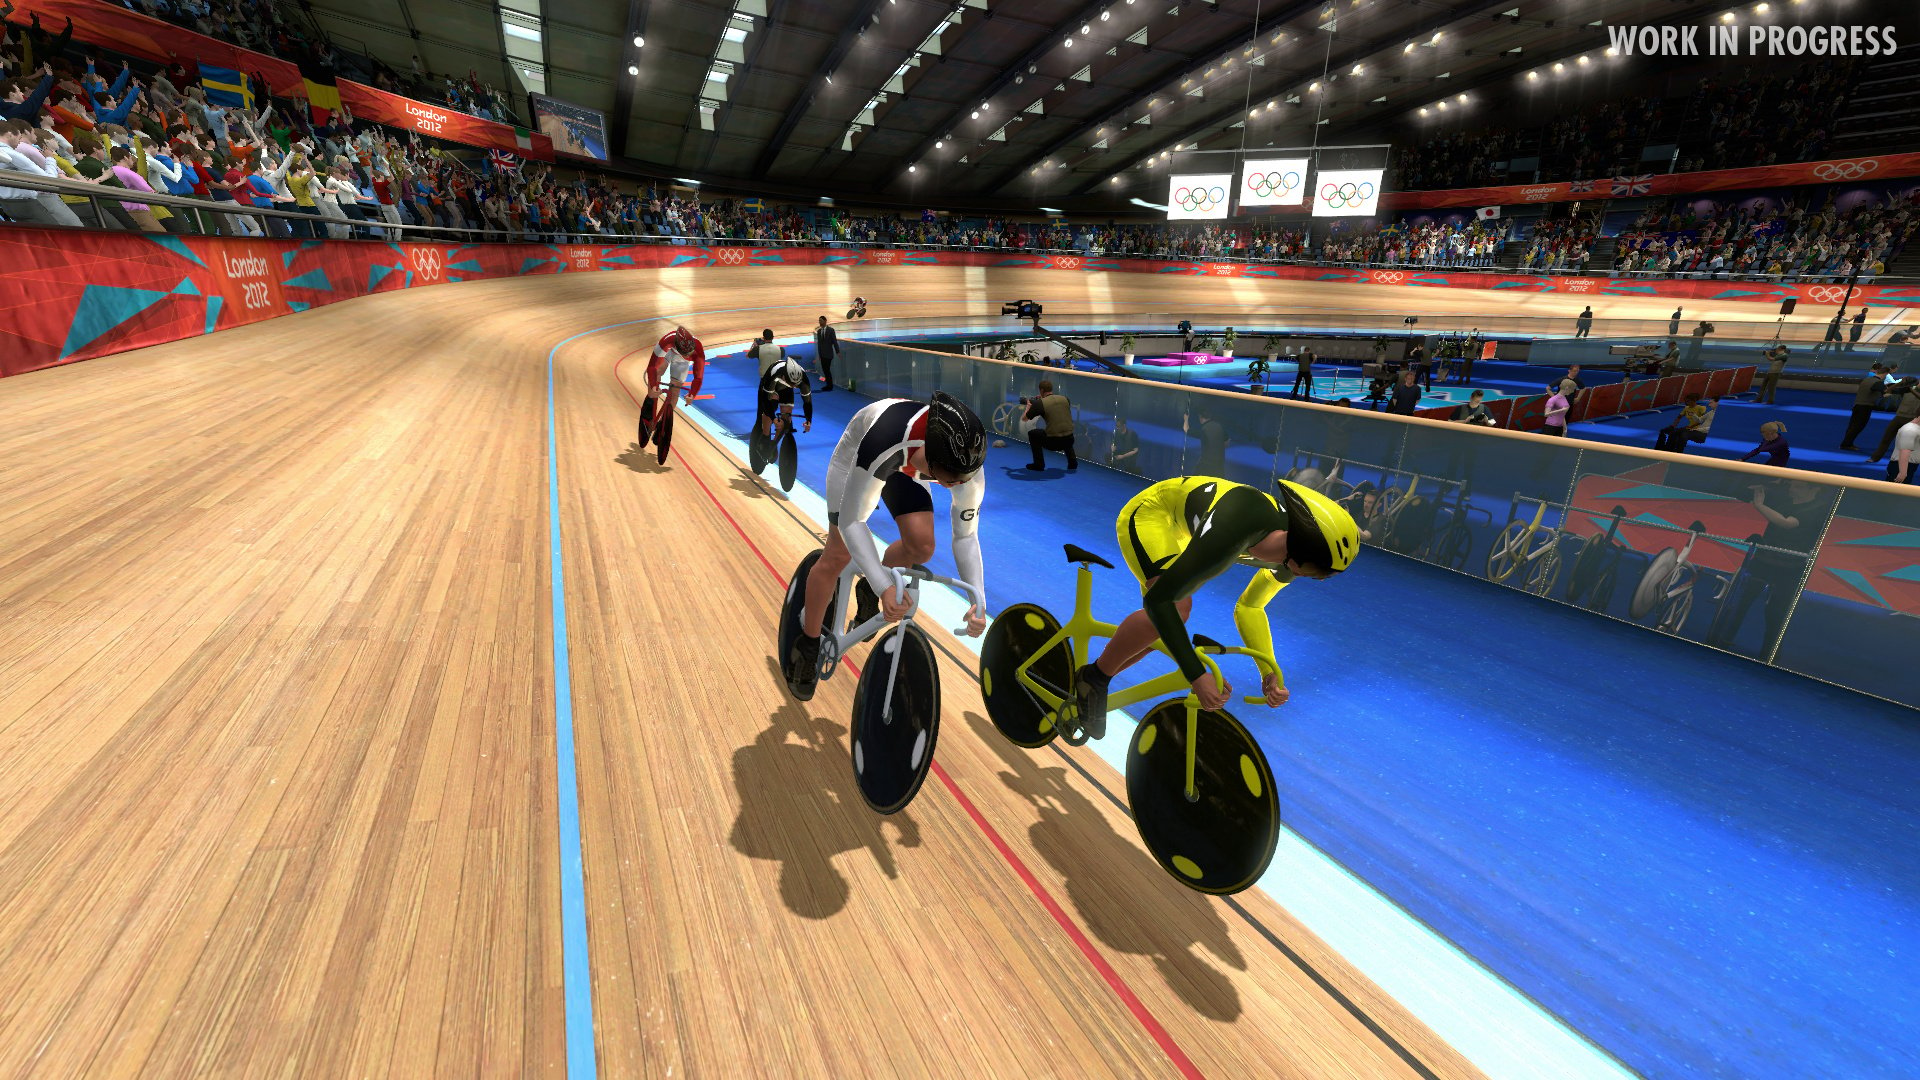 London 2012 - The Video of Olympic Games Review (PlayStation 3) | Push